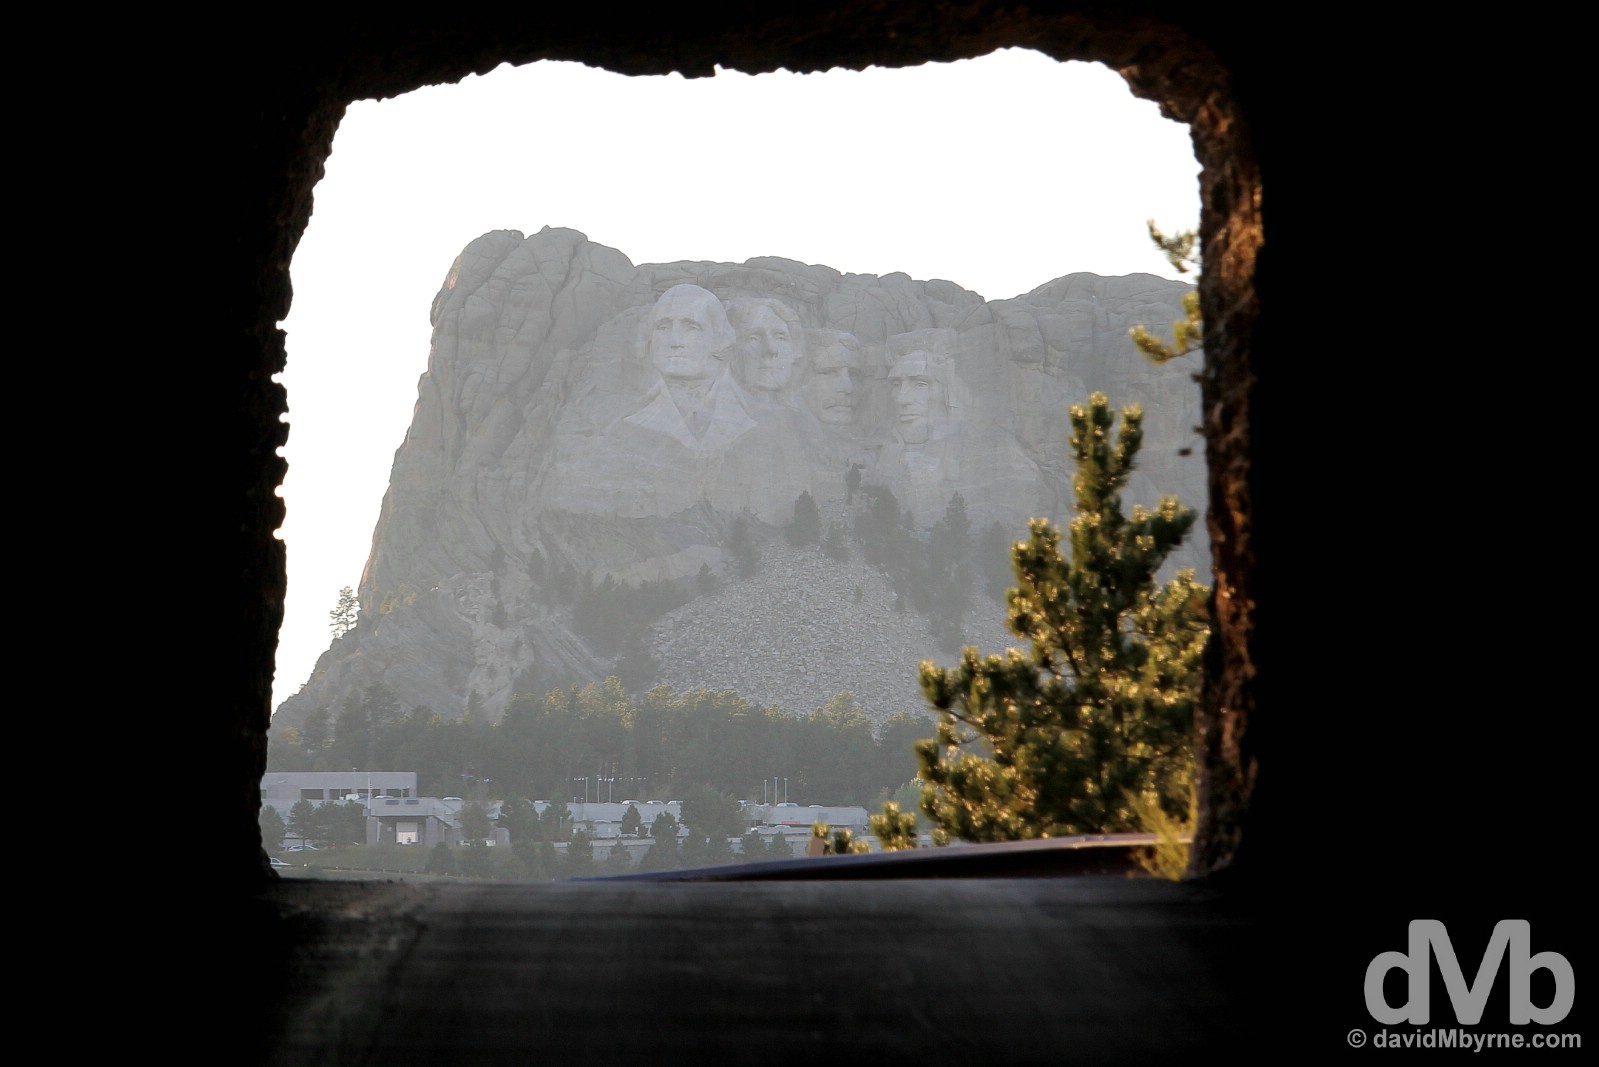 Mount Rushmore National Monument as seen through the Doane Robinson Tunnel of the Needles Highway of Custer State Park, Black Hills, South Dakota. September 2, 2016.